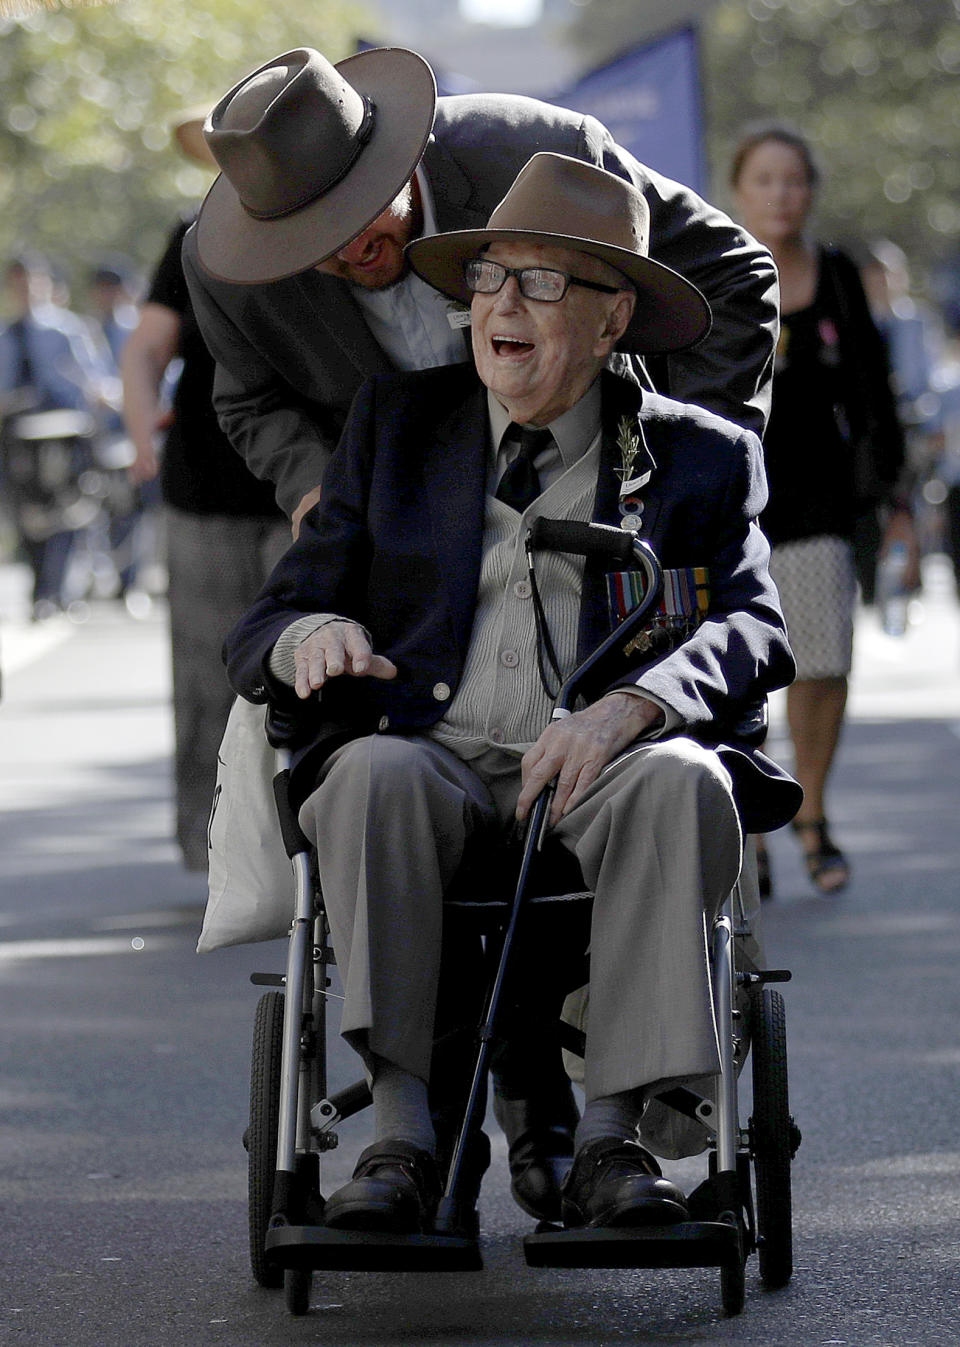 World War II veteran 103-year-old Bert Collins is pushed in his wheelchair during a march celebrating ANZAC Day, a national day of remembrance in Australia and New Zealand that commemorates those that served and died in all wars, conflicts, and while peacekeeping, in Sydney, Australia, Thursday, April 25, 2019. (AP Photo/Rick Rycroft)